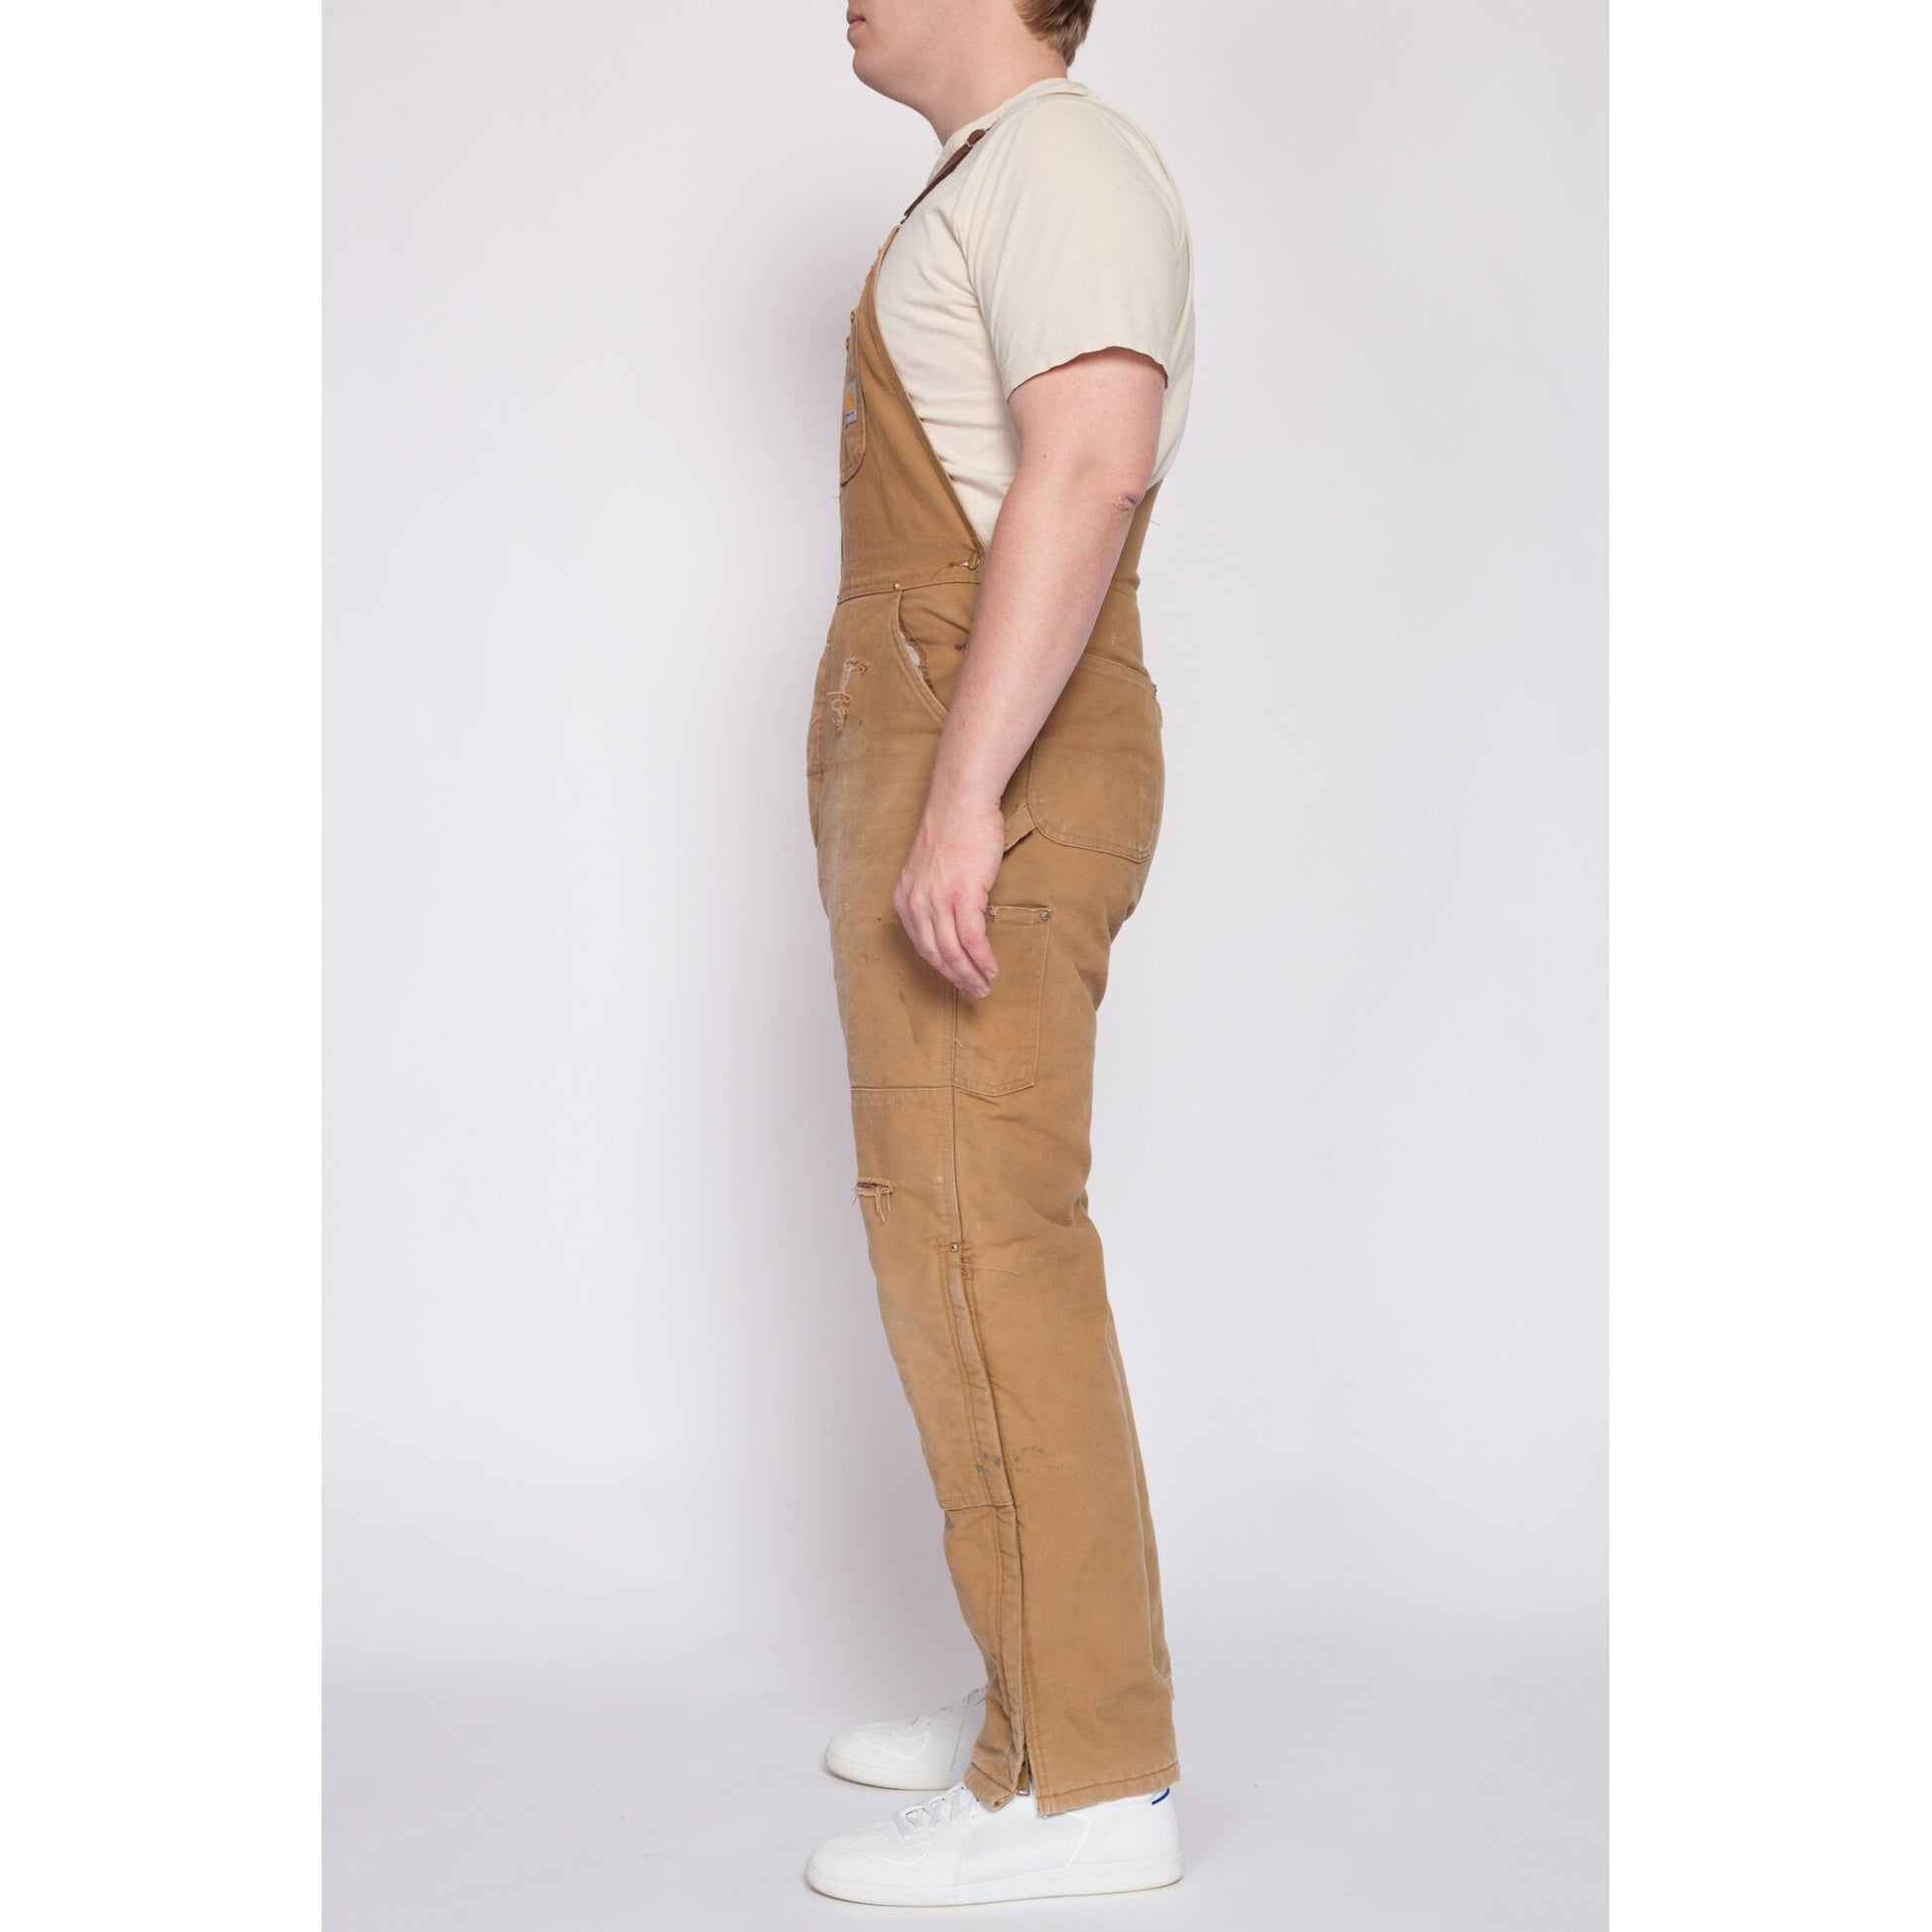 Lined and Insulated Pants for Men & Women, Carhartt